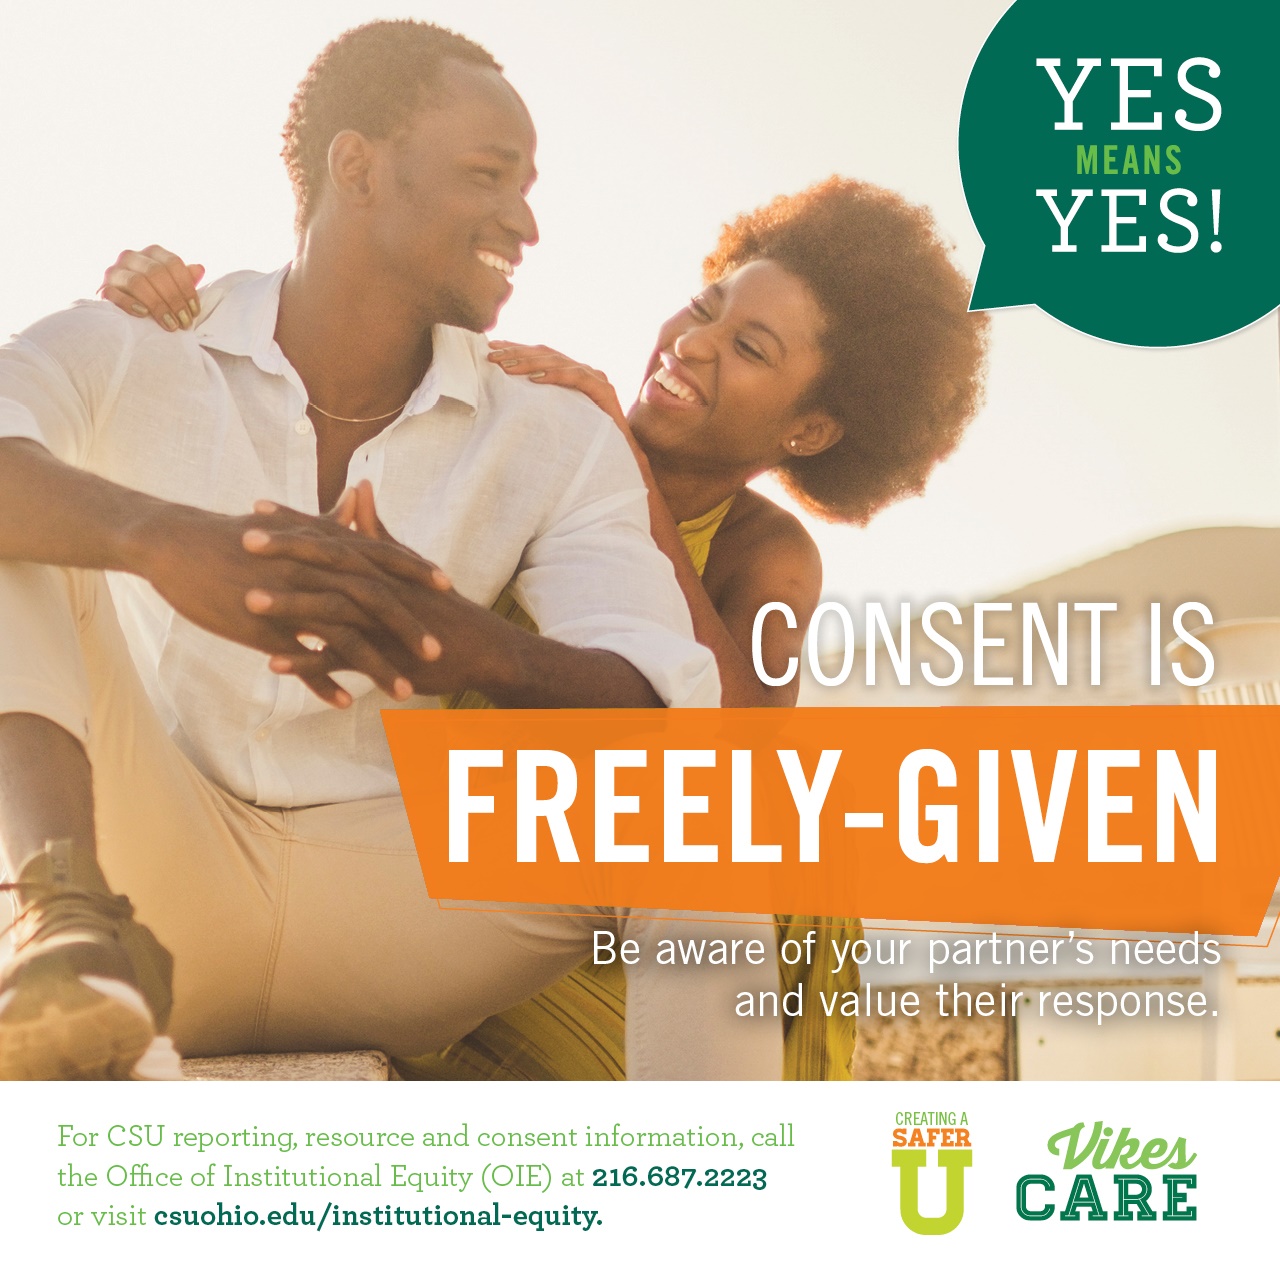 Yes means yes: Consent is freely given!